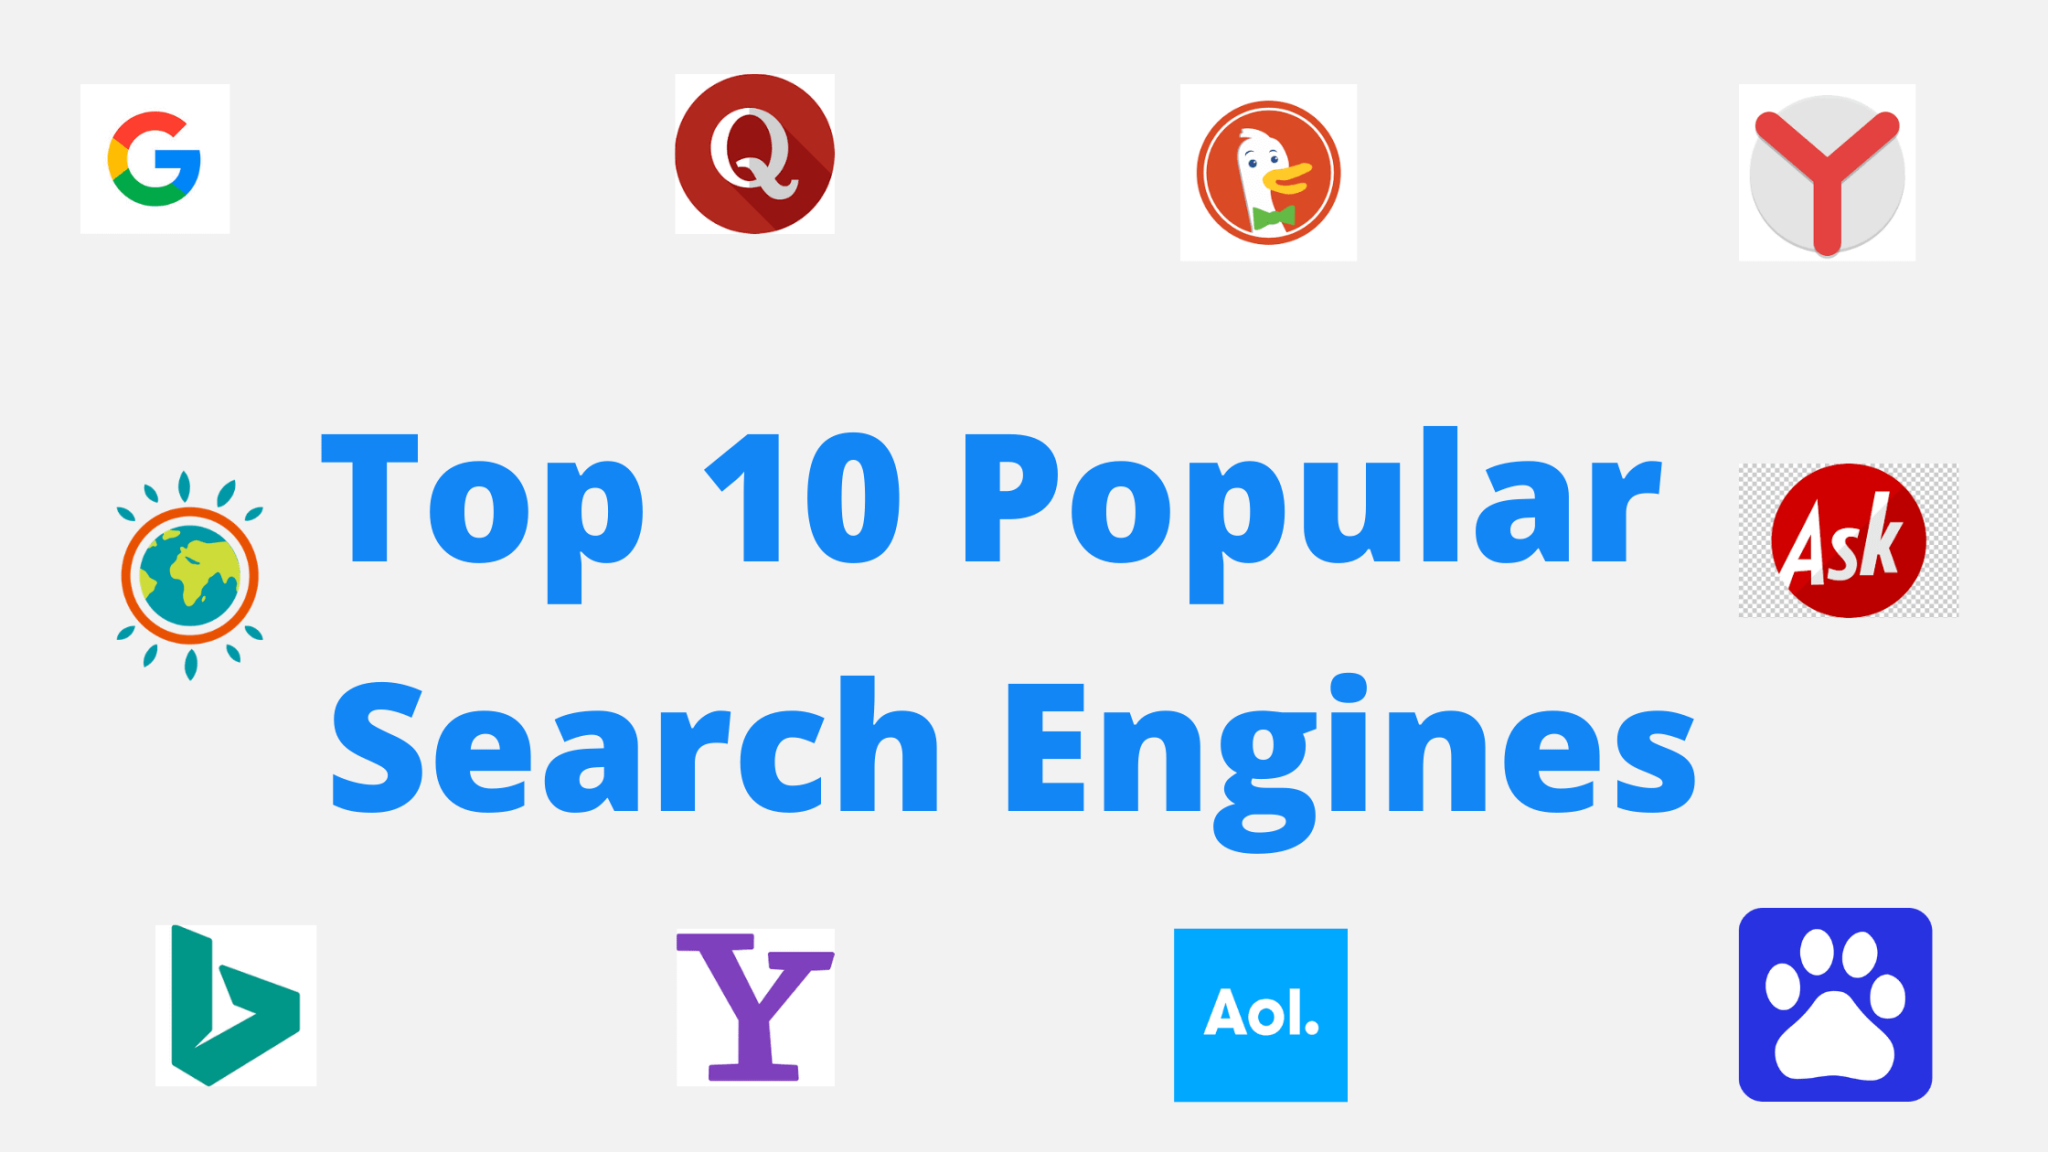 Top 10 Popular Search Engines 2020